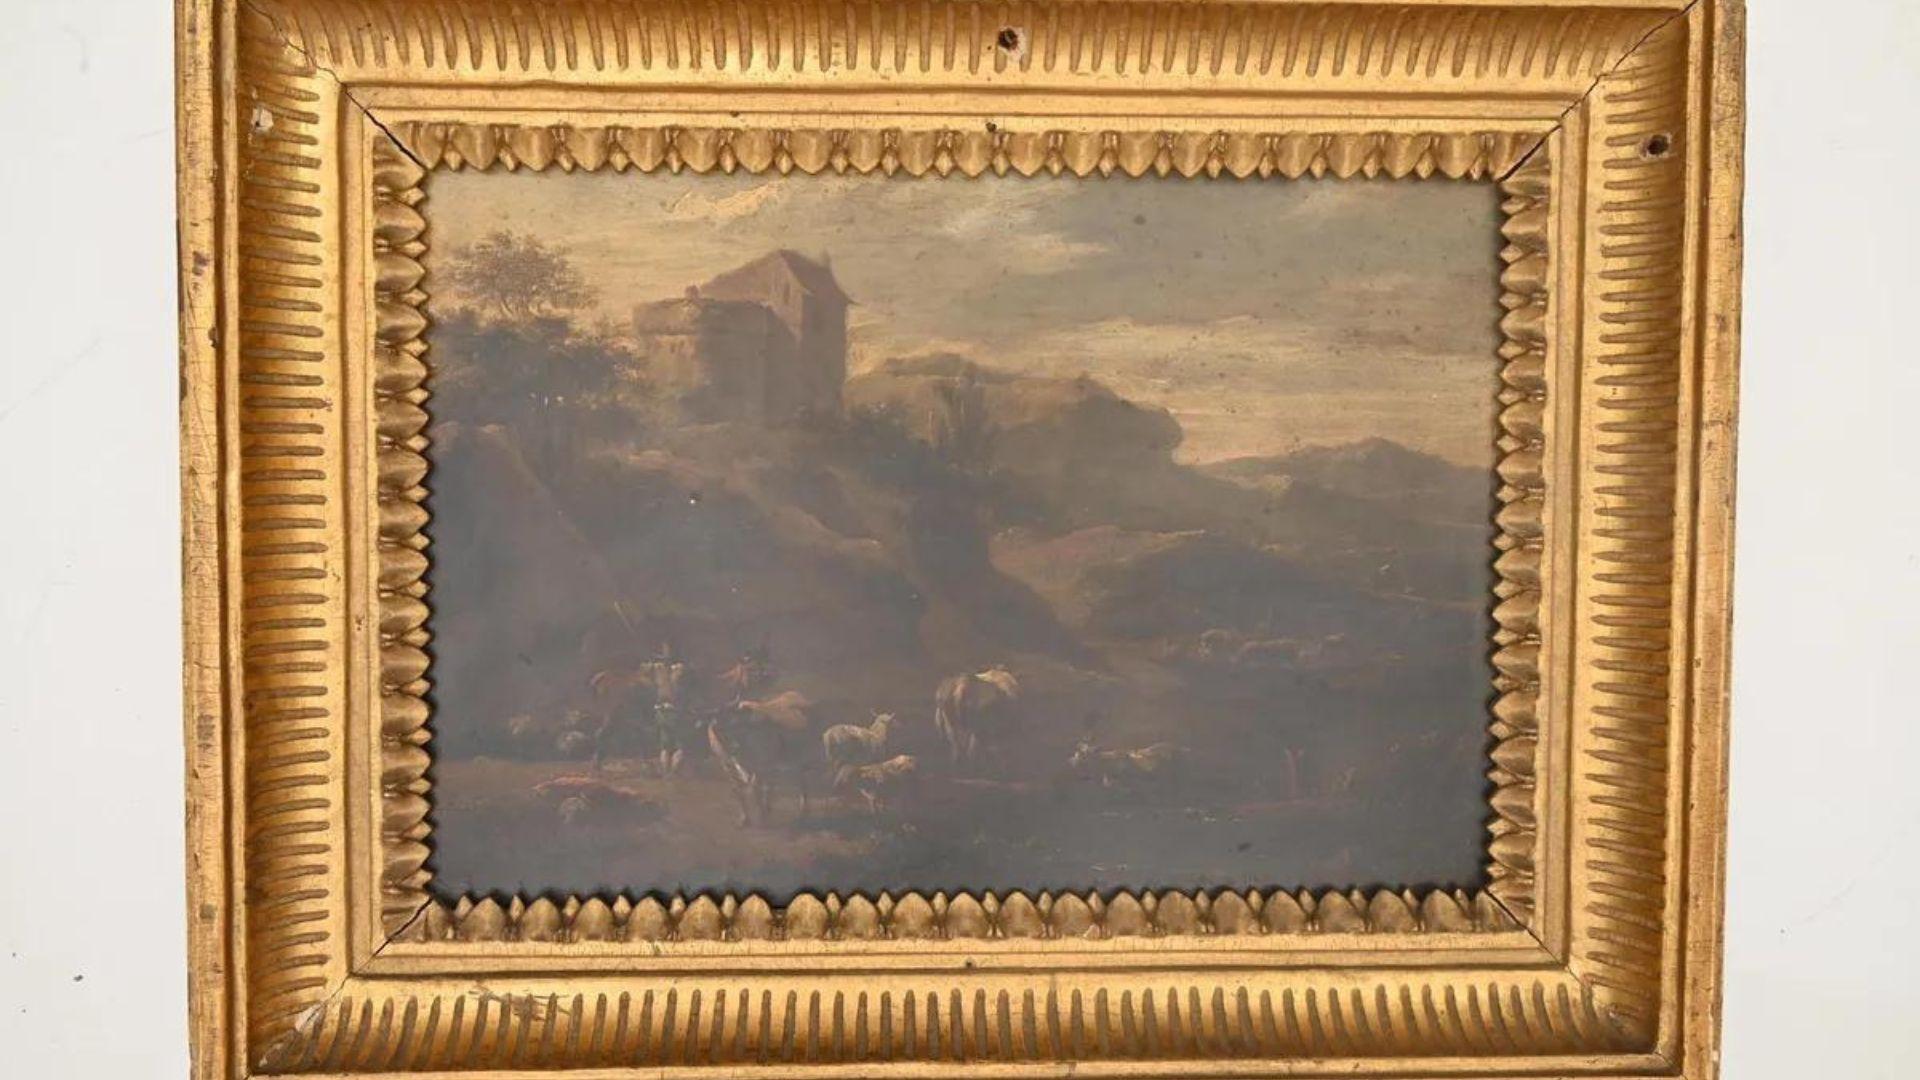 The 'Landscape of Italian Character' painting, portraying a rustic Italian countryside scene with grazing animals and a distant building. It is encased in a detailed gold frame.